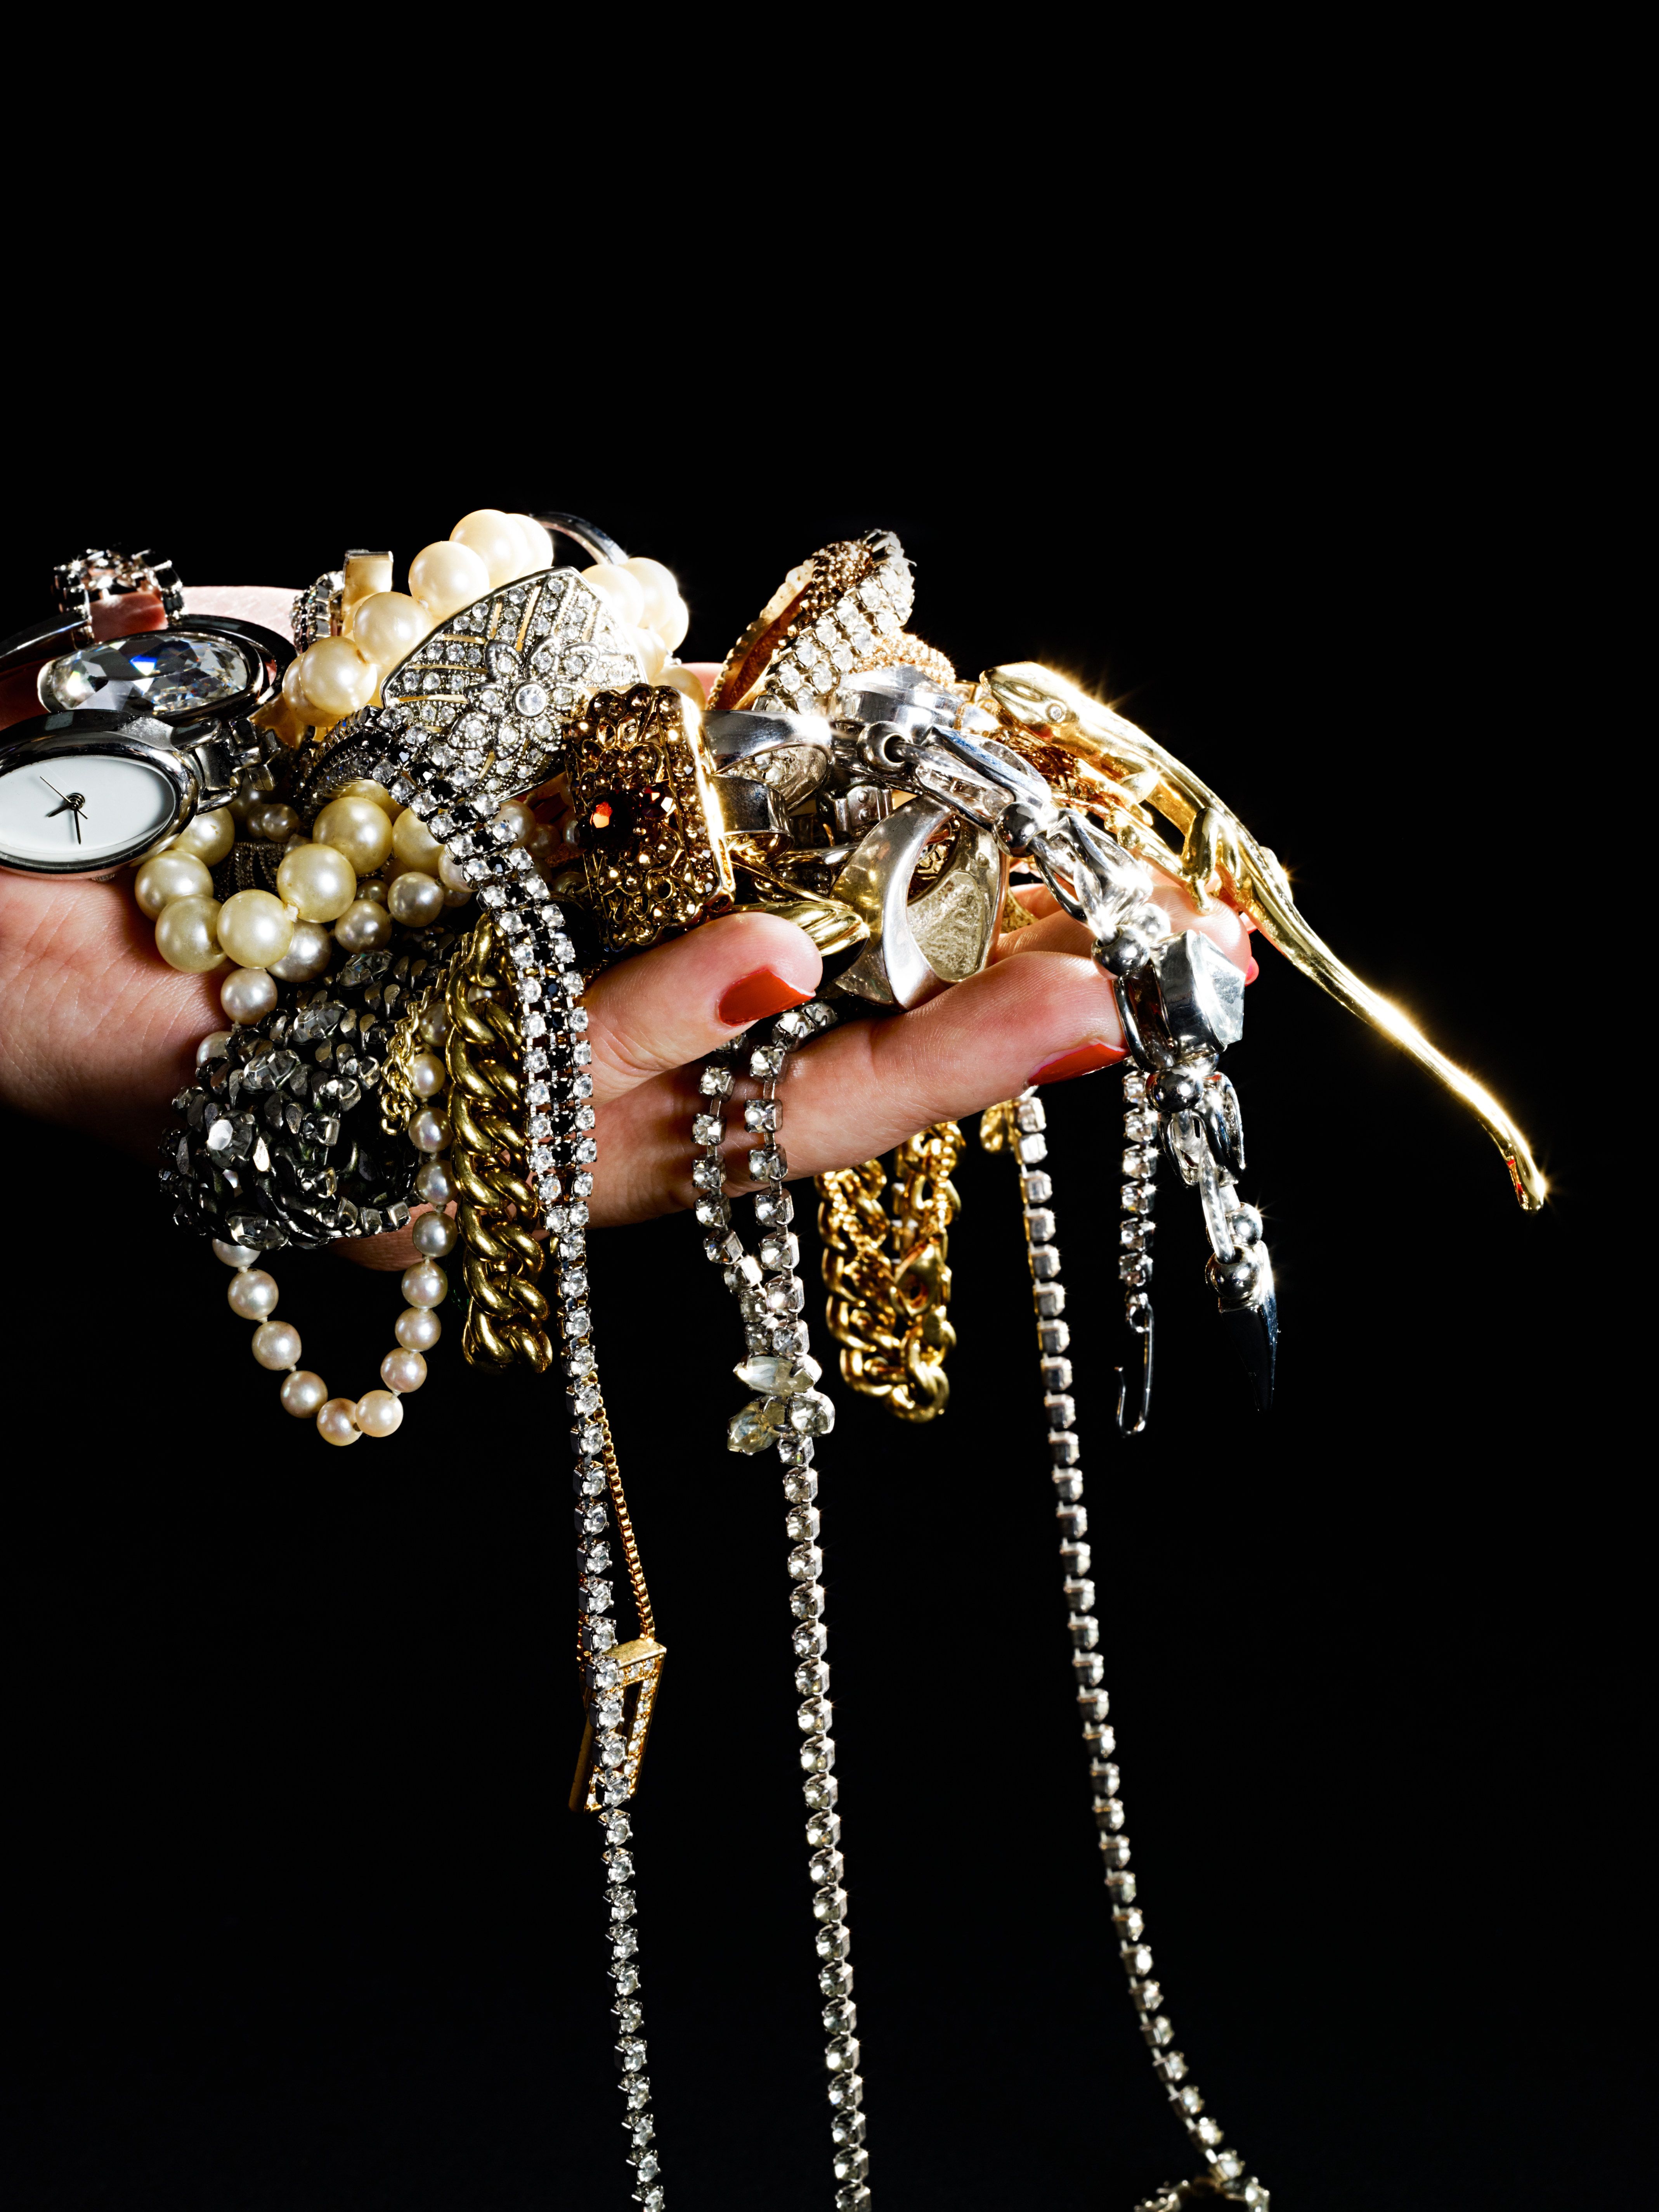 A woman holding jewelry. | Source: Getty Images